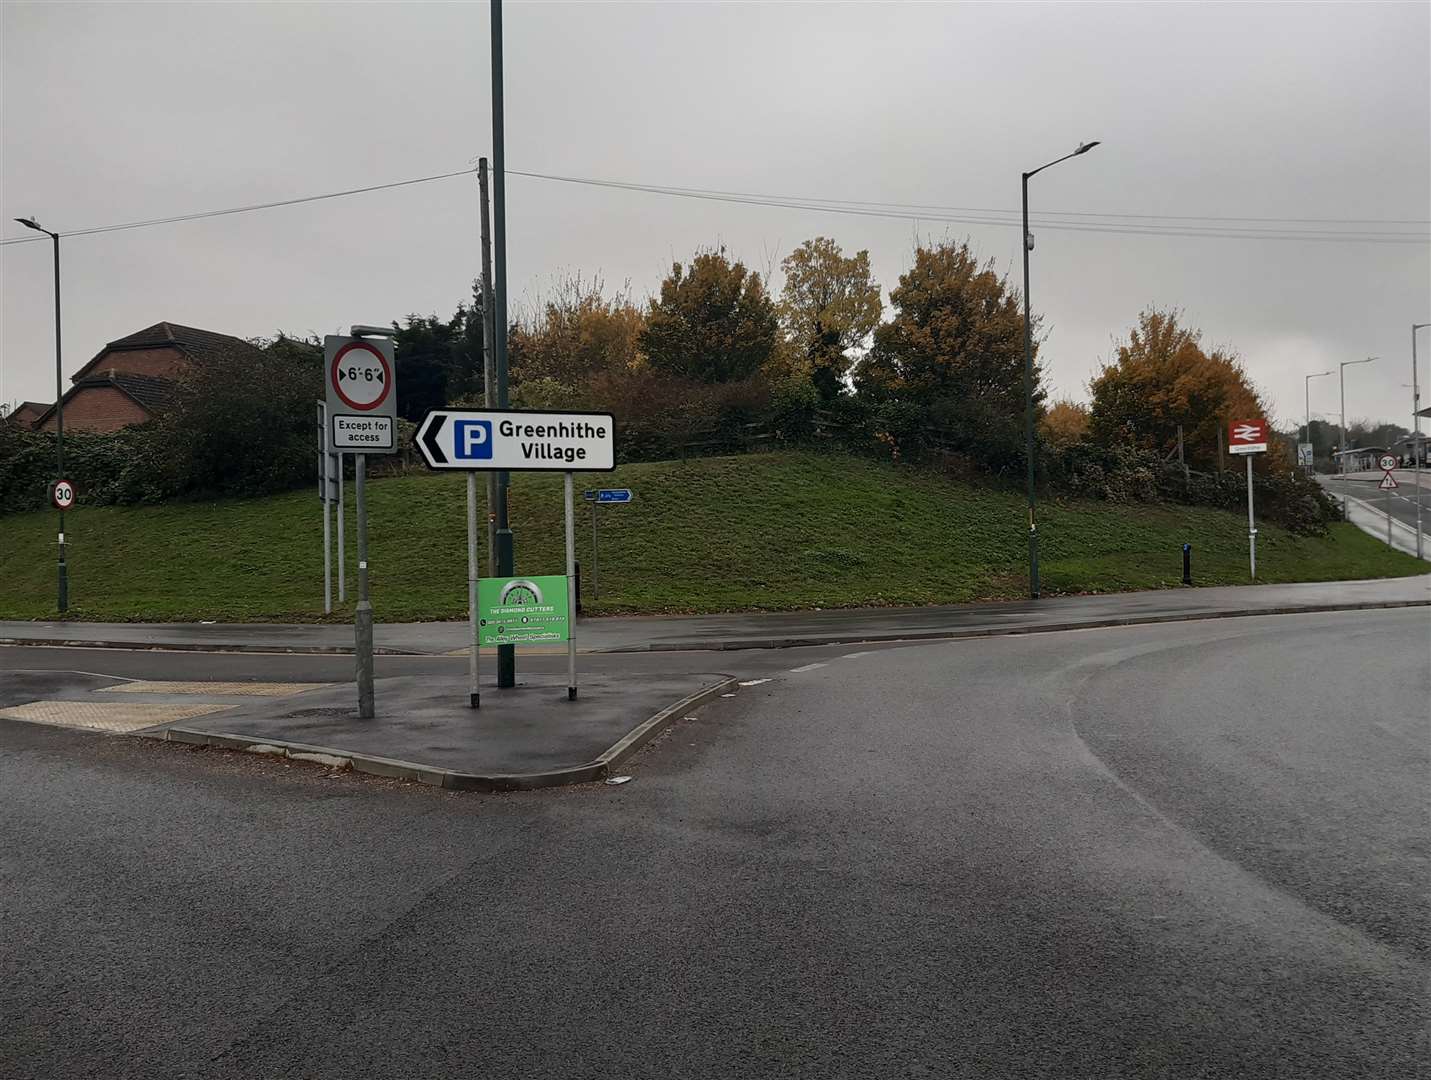 There are plans for 47 new flats on the corner of Station Road, Greenhithe. Photo: Sean Delaney